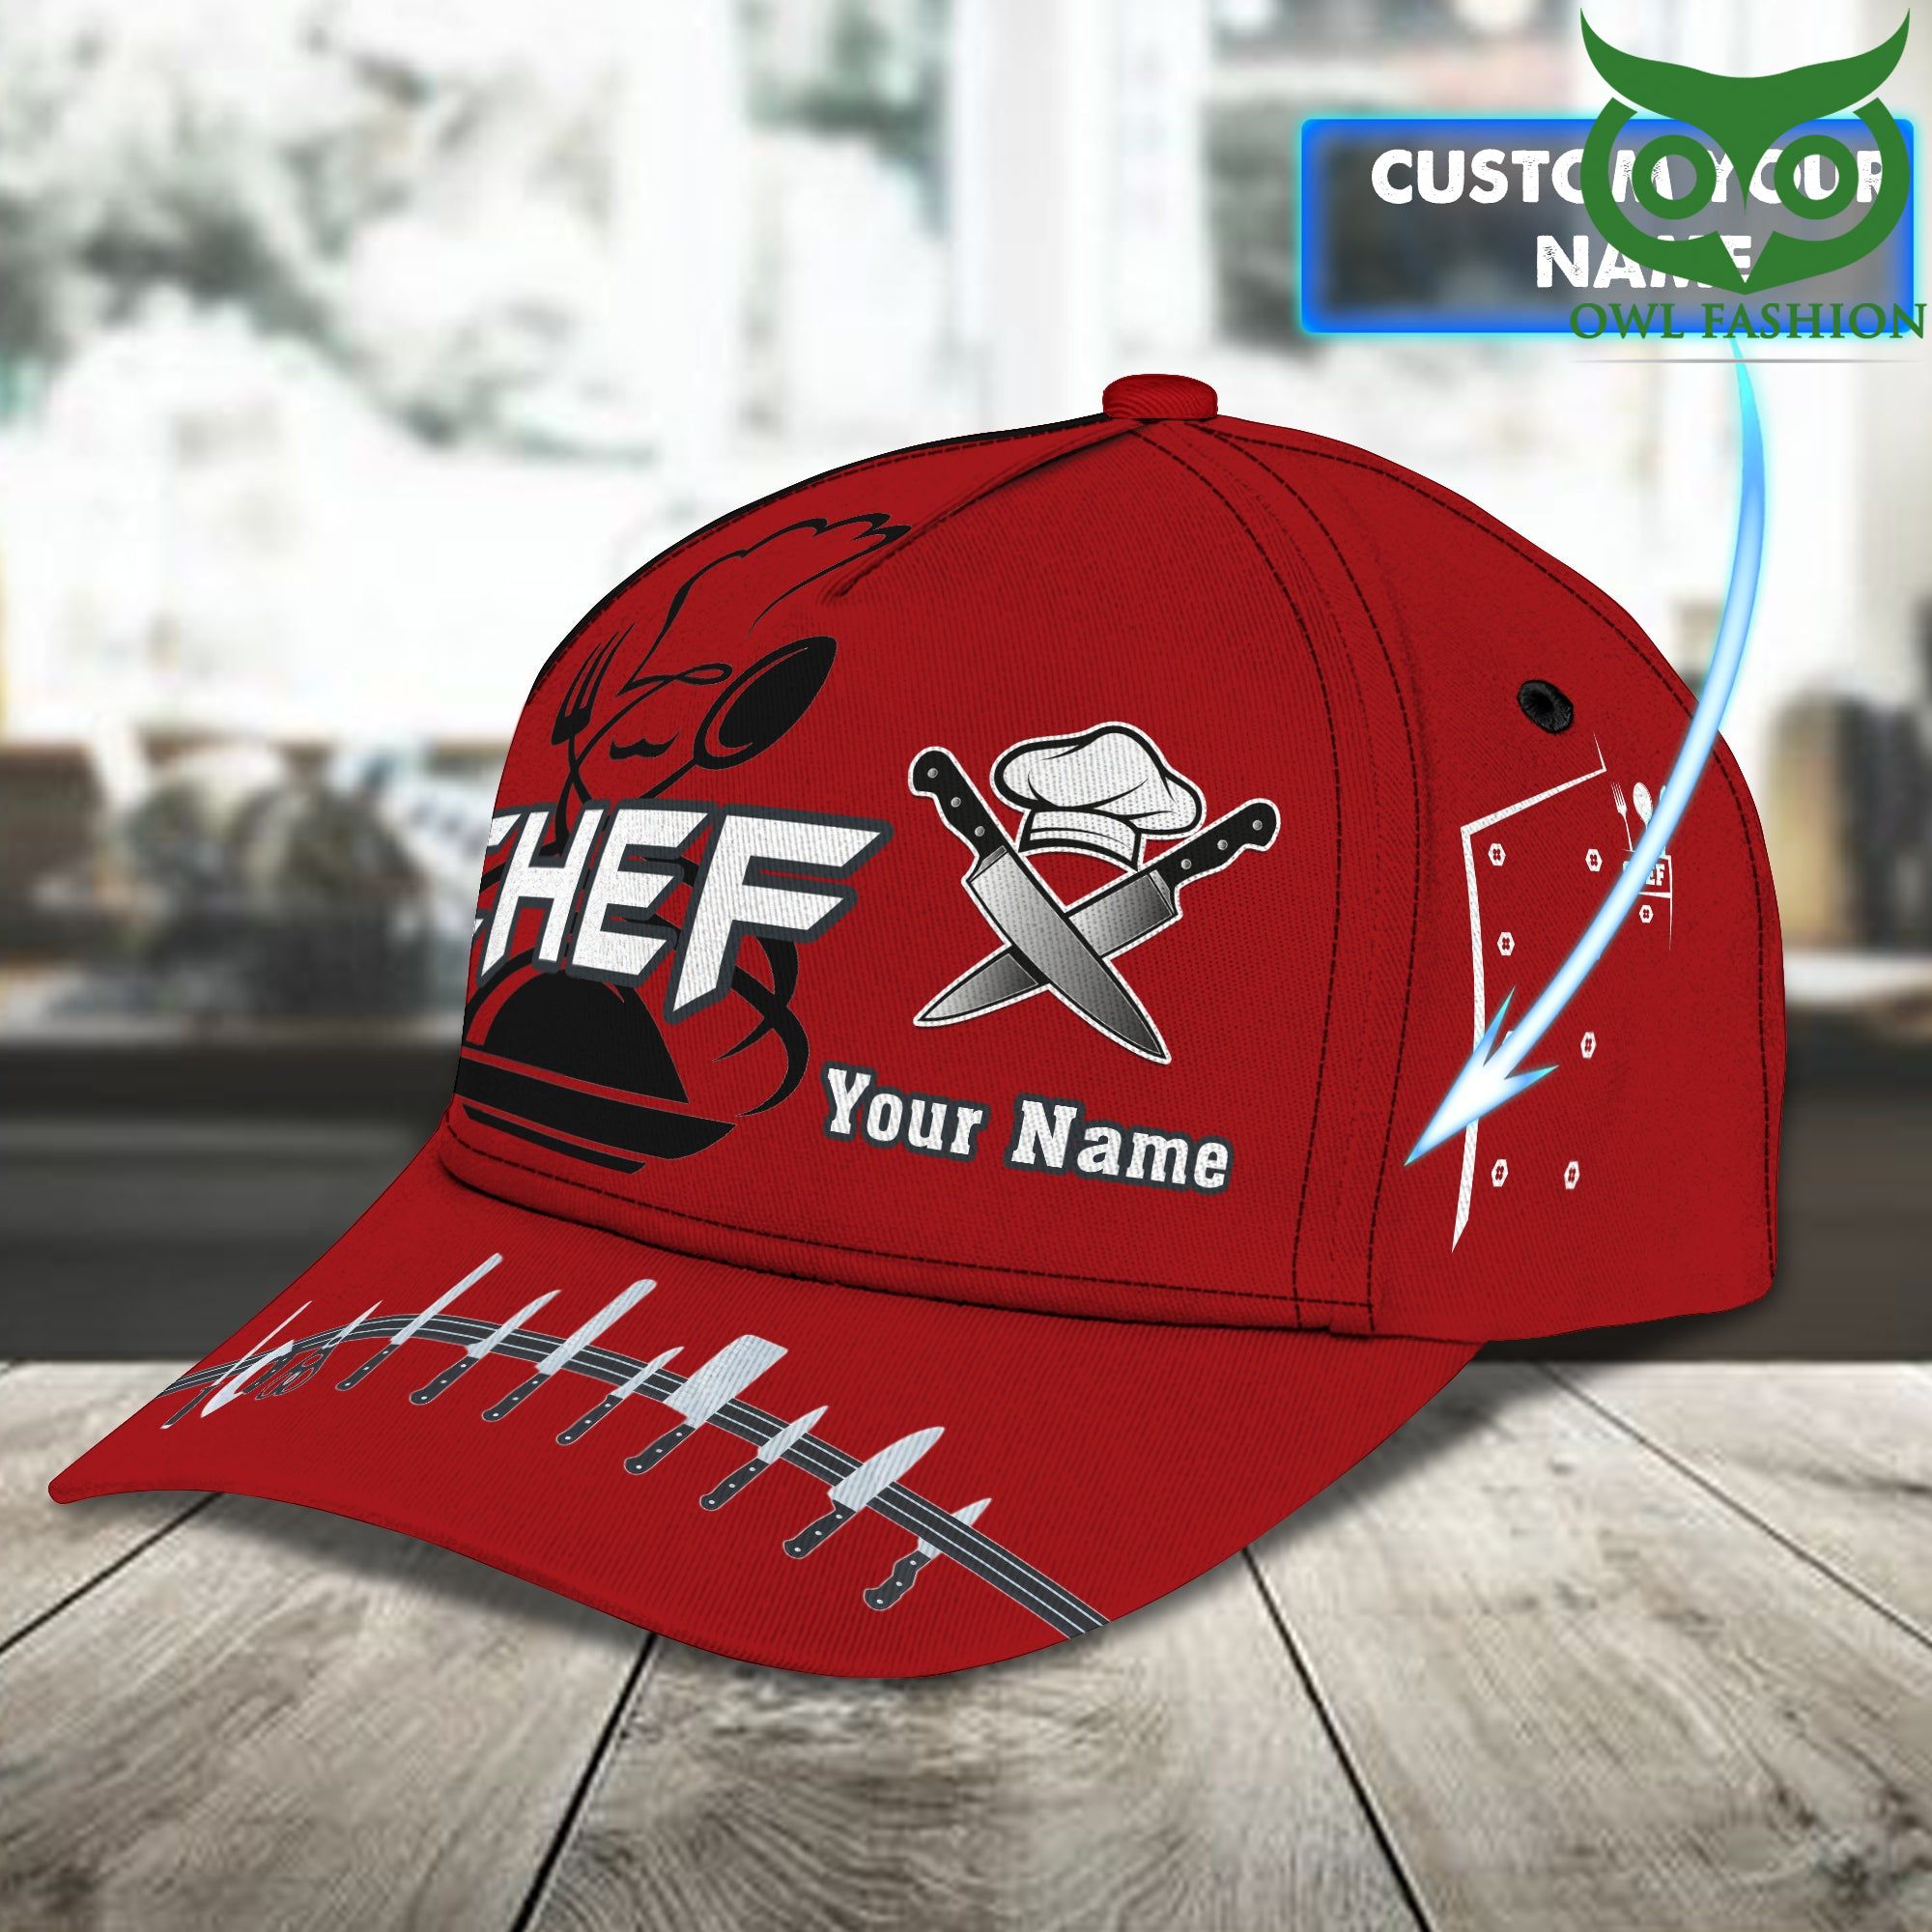 20 Personalized CHEF Knives red 3D Classic cap